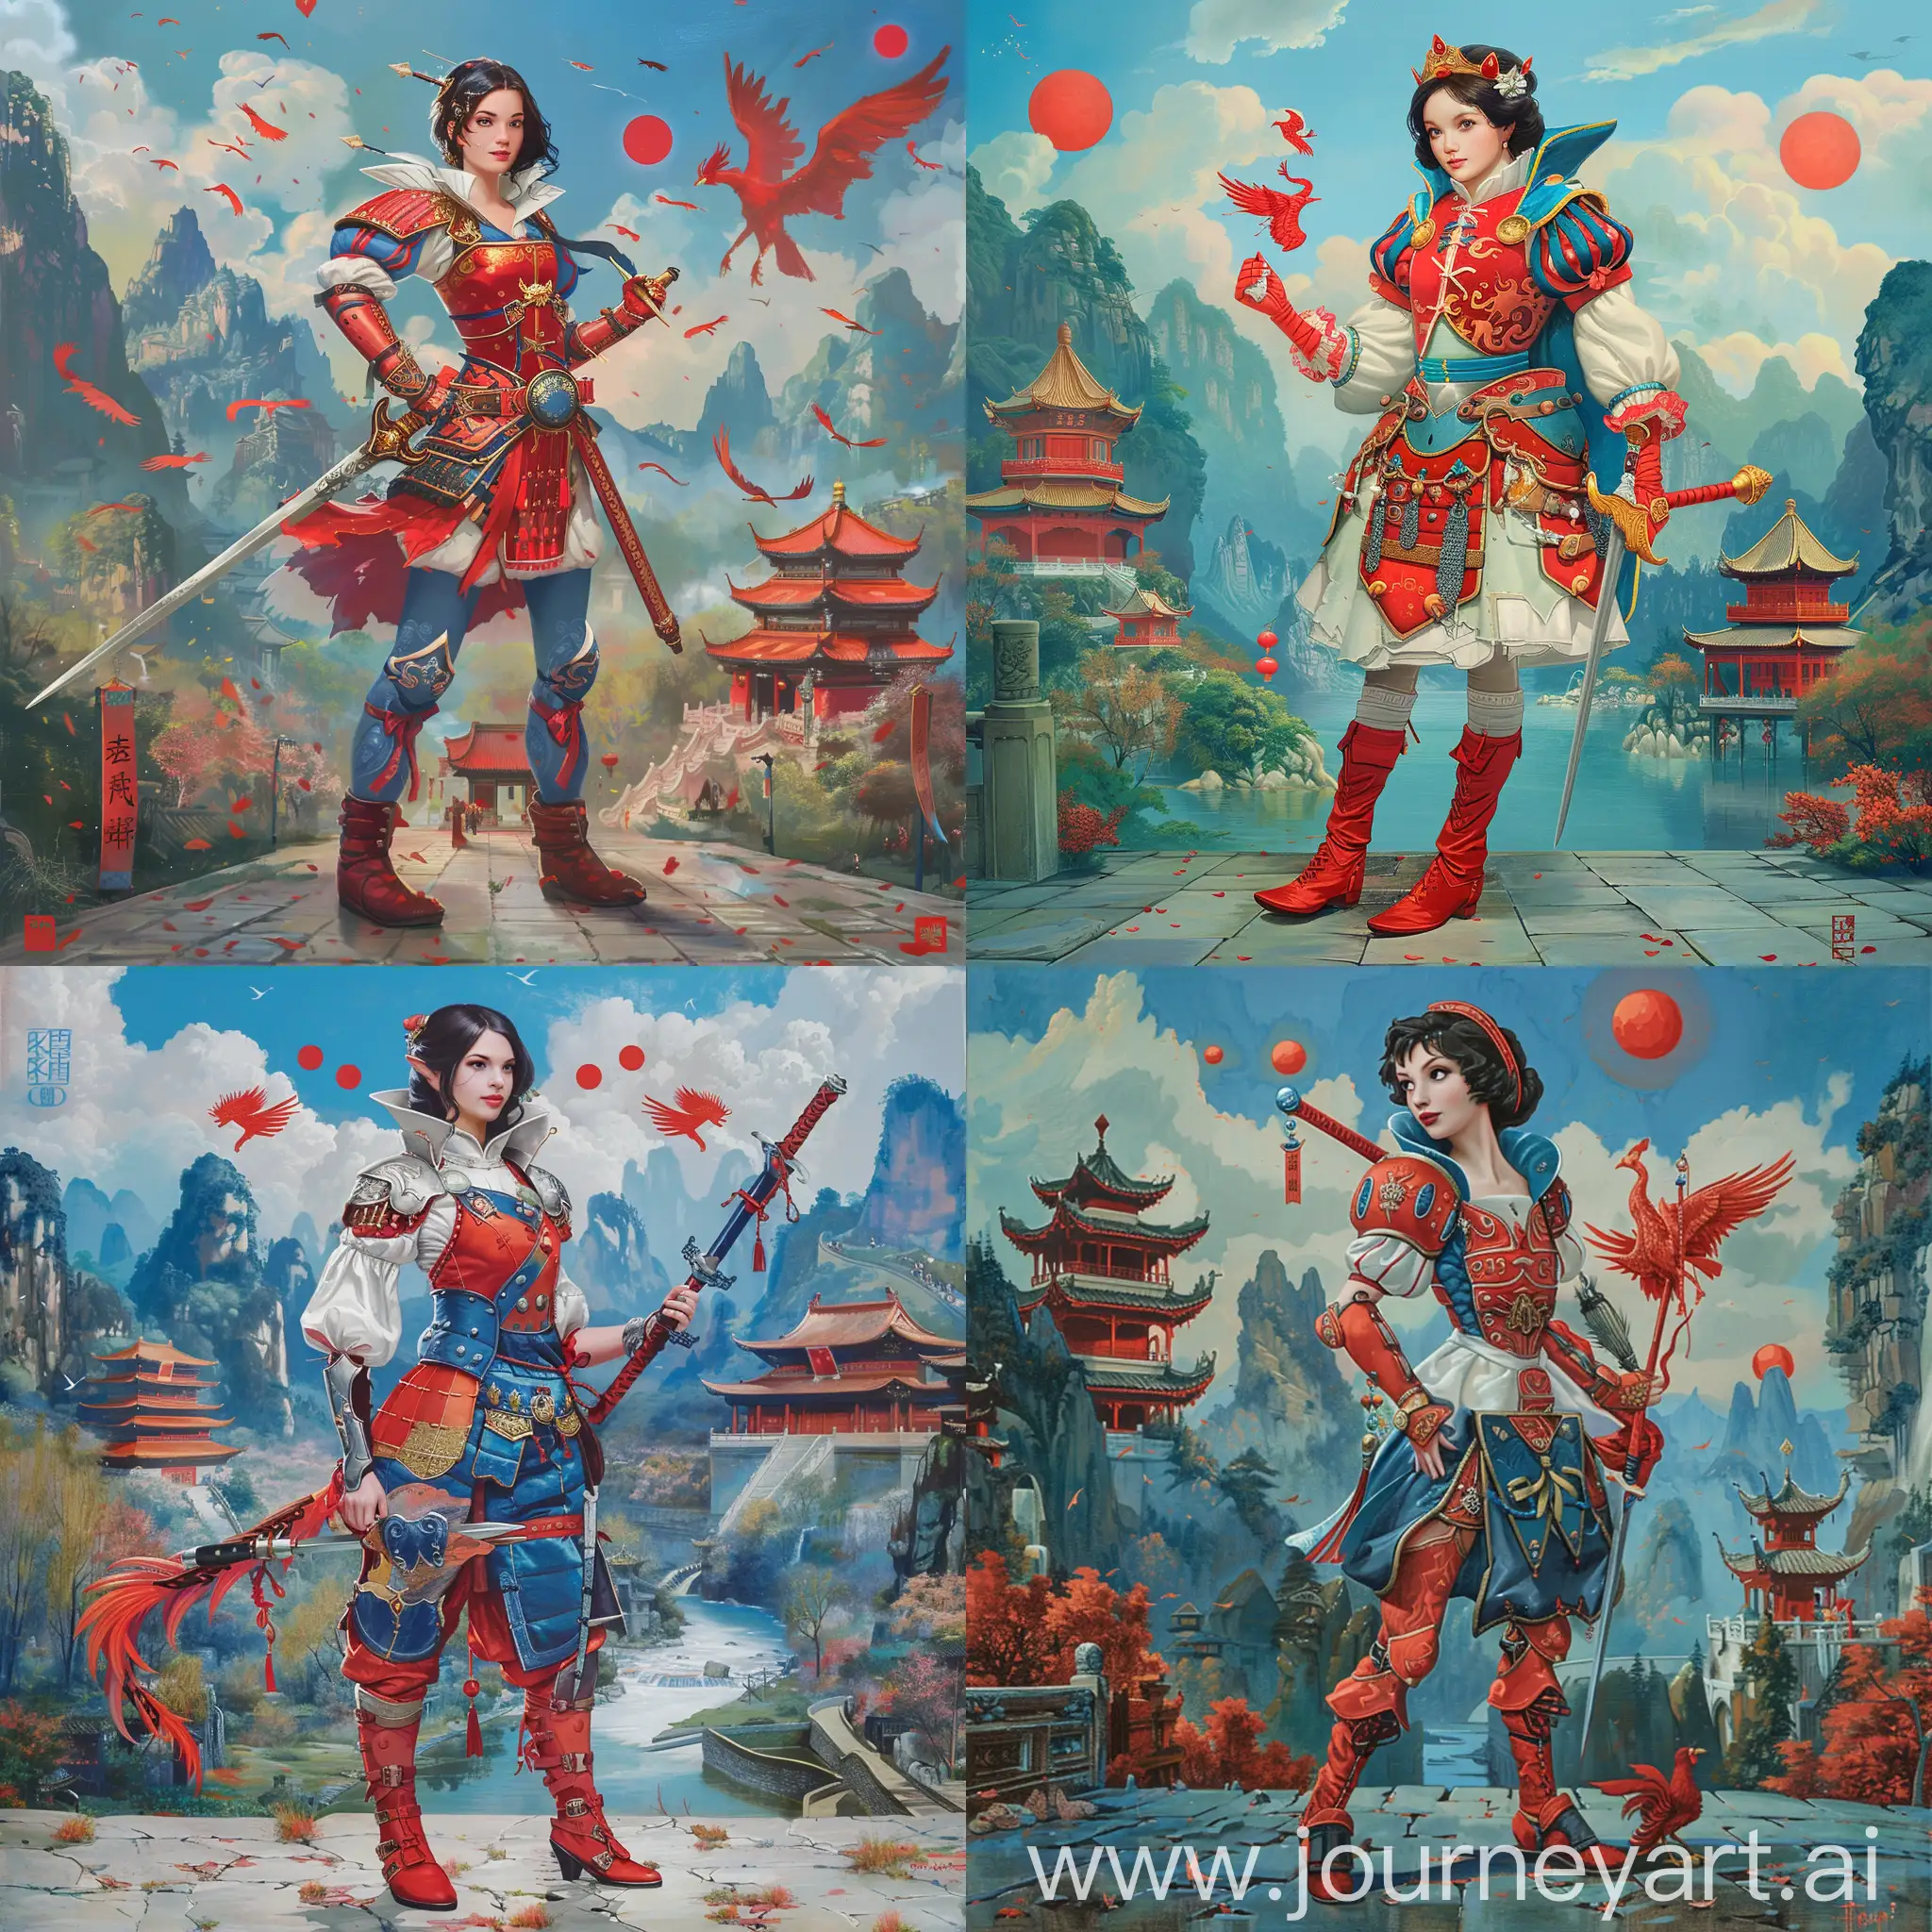 Historic painting style:

a Disney German Princess Snow White, she wears red and marine blue color Chinese style medieval armor and boots, she holds a Chinese sword in right hand, 

Chinese Guilin mountains and temple as background, red phoenix and three small red suns in blue sky.